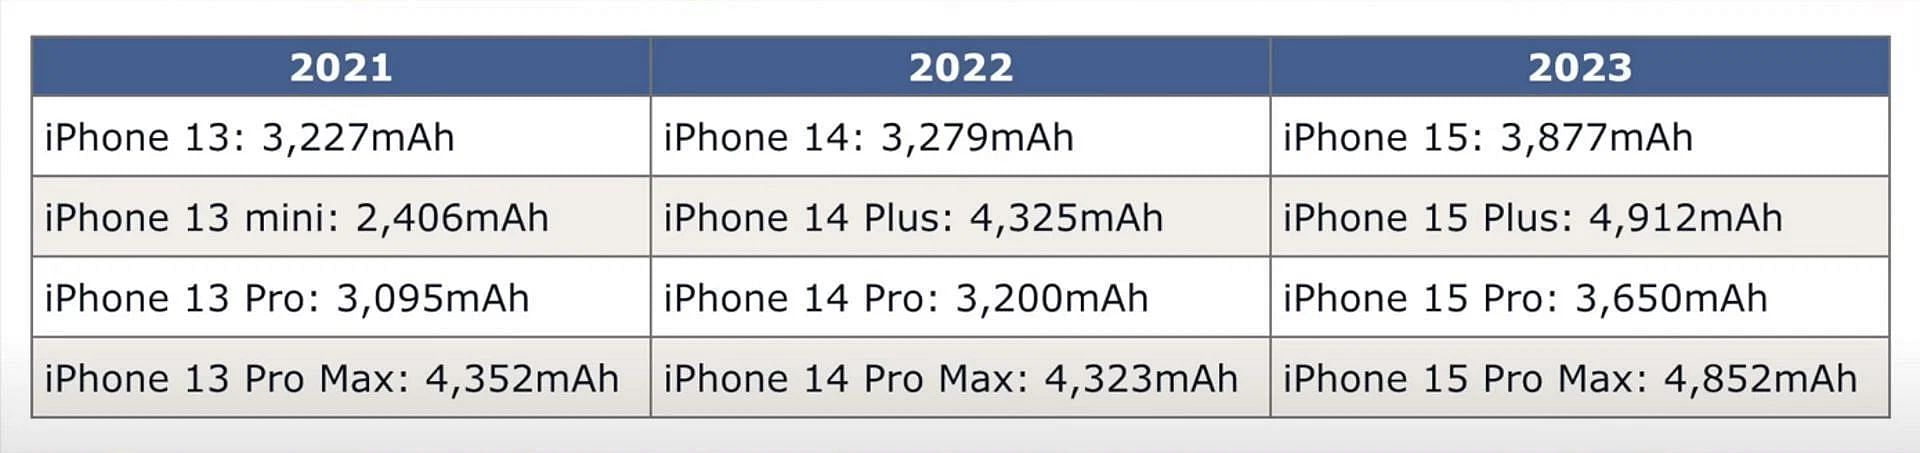 iPhone 15 models will come with bigger battery capacities (Image via MacRumors)